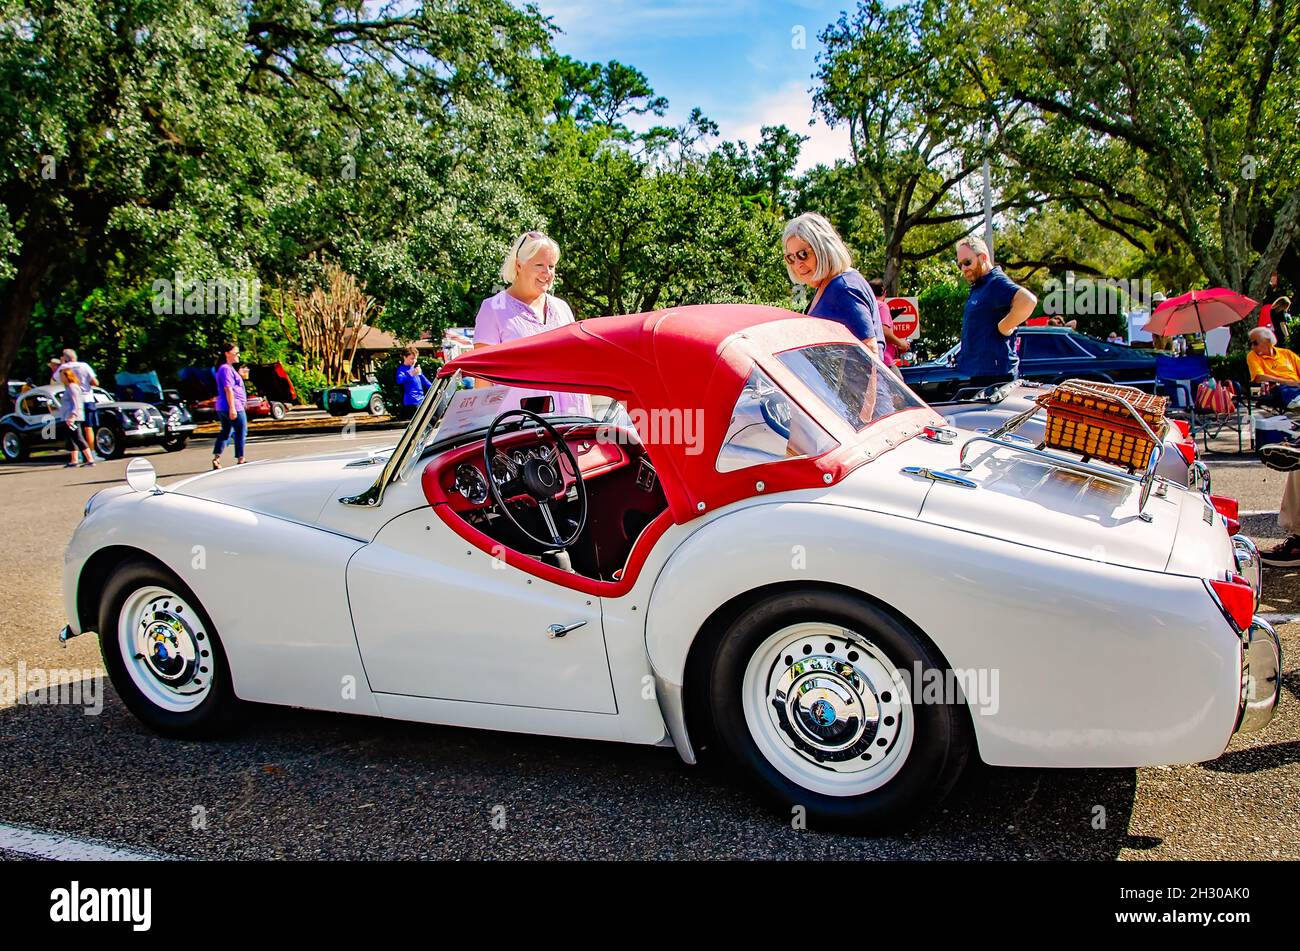 A vintage 1966 Triumph TR3 is displayed at the 31st annual British Car Festival, Oct. 24, 2021, in Fairhope, Alabama. Stock Photo